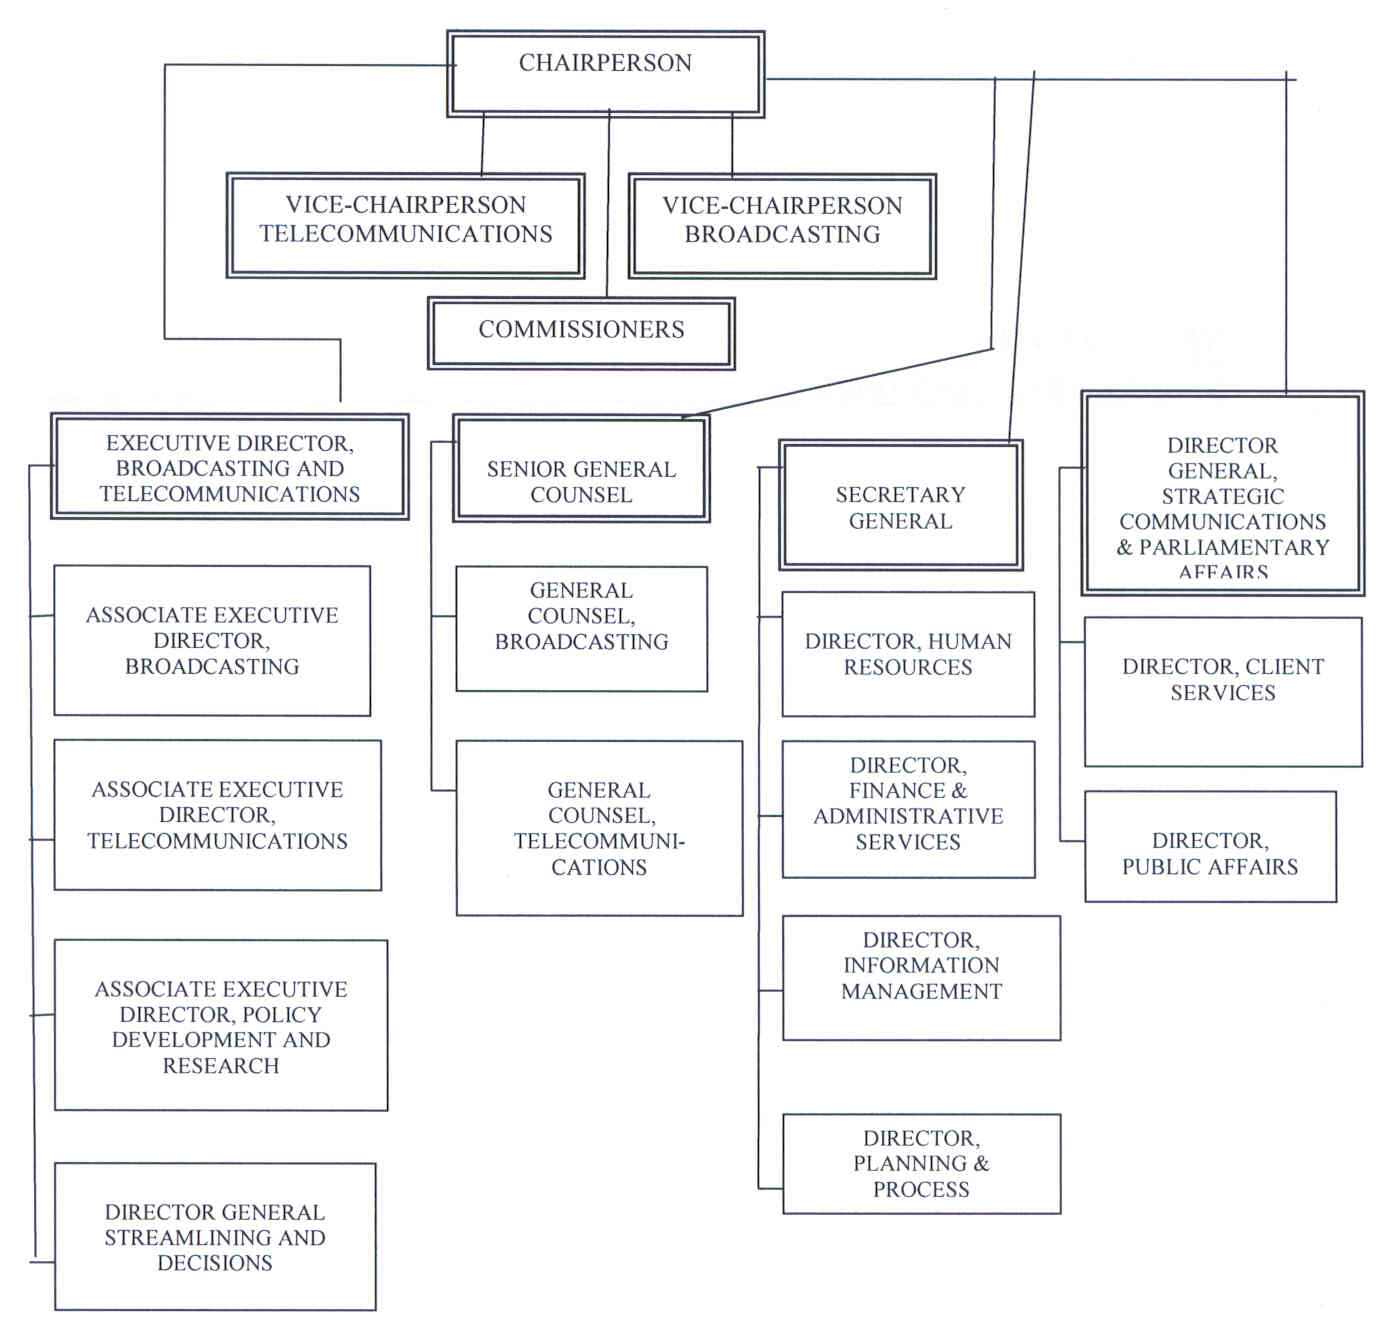 CRTC Organization chart: Reporting to the Chairperson is the Vice-Chairperson Telecommunications, the Vice-Chairperson Broadcasting, the Commissioners, the Executive Director, Broadcasting and Telecommunications, the Senior General Counsel, the Secretary General and the Director General, Strategic Communications & Parliamentary Affairs. Reporting to the Executive Director, Broadcasting and Telecommunications is the Associate Executive Director, Broadcasting, the Associate Executive Director, Telecommunications, the Associate Executive Director, Policy Development and Research and the Director General Streamlining and Decisions. Reporting to the Senior General Counsel is the General Counsel, Broadcasting and the General Counsel, Telecommunications. Reporting to the Secretary General is the Director, Human Resources, the Director, Finance & Administrataive Services, the Director, Information Management and the Director, Planning & Process. Reporting the Director General, Strategic Communications & Parliamentary Affairs is the Director, Client Services and the Director, Public Affairs.